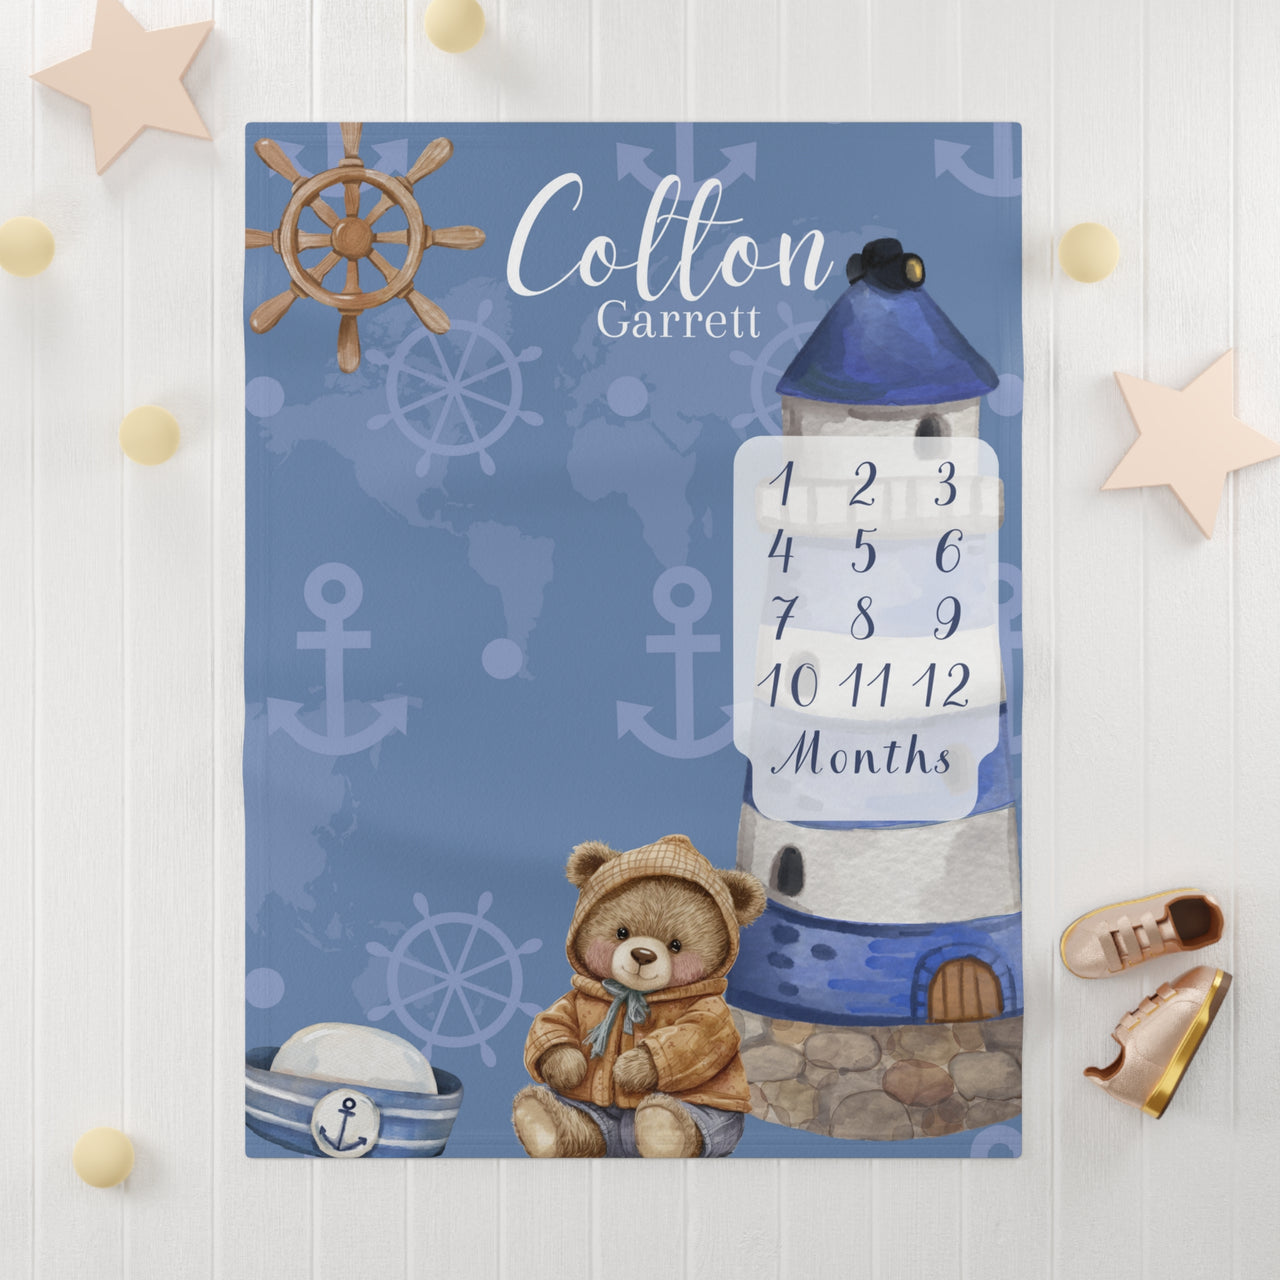 Nautical Bear Themed Soft Fleece Milestone Blanket, Boys Monthly Growth Tracker, Personalized Baby Blanket, Baby Shower Gift